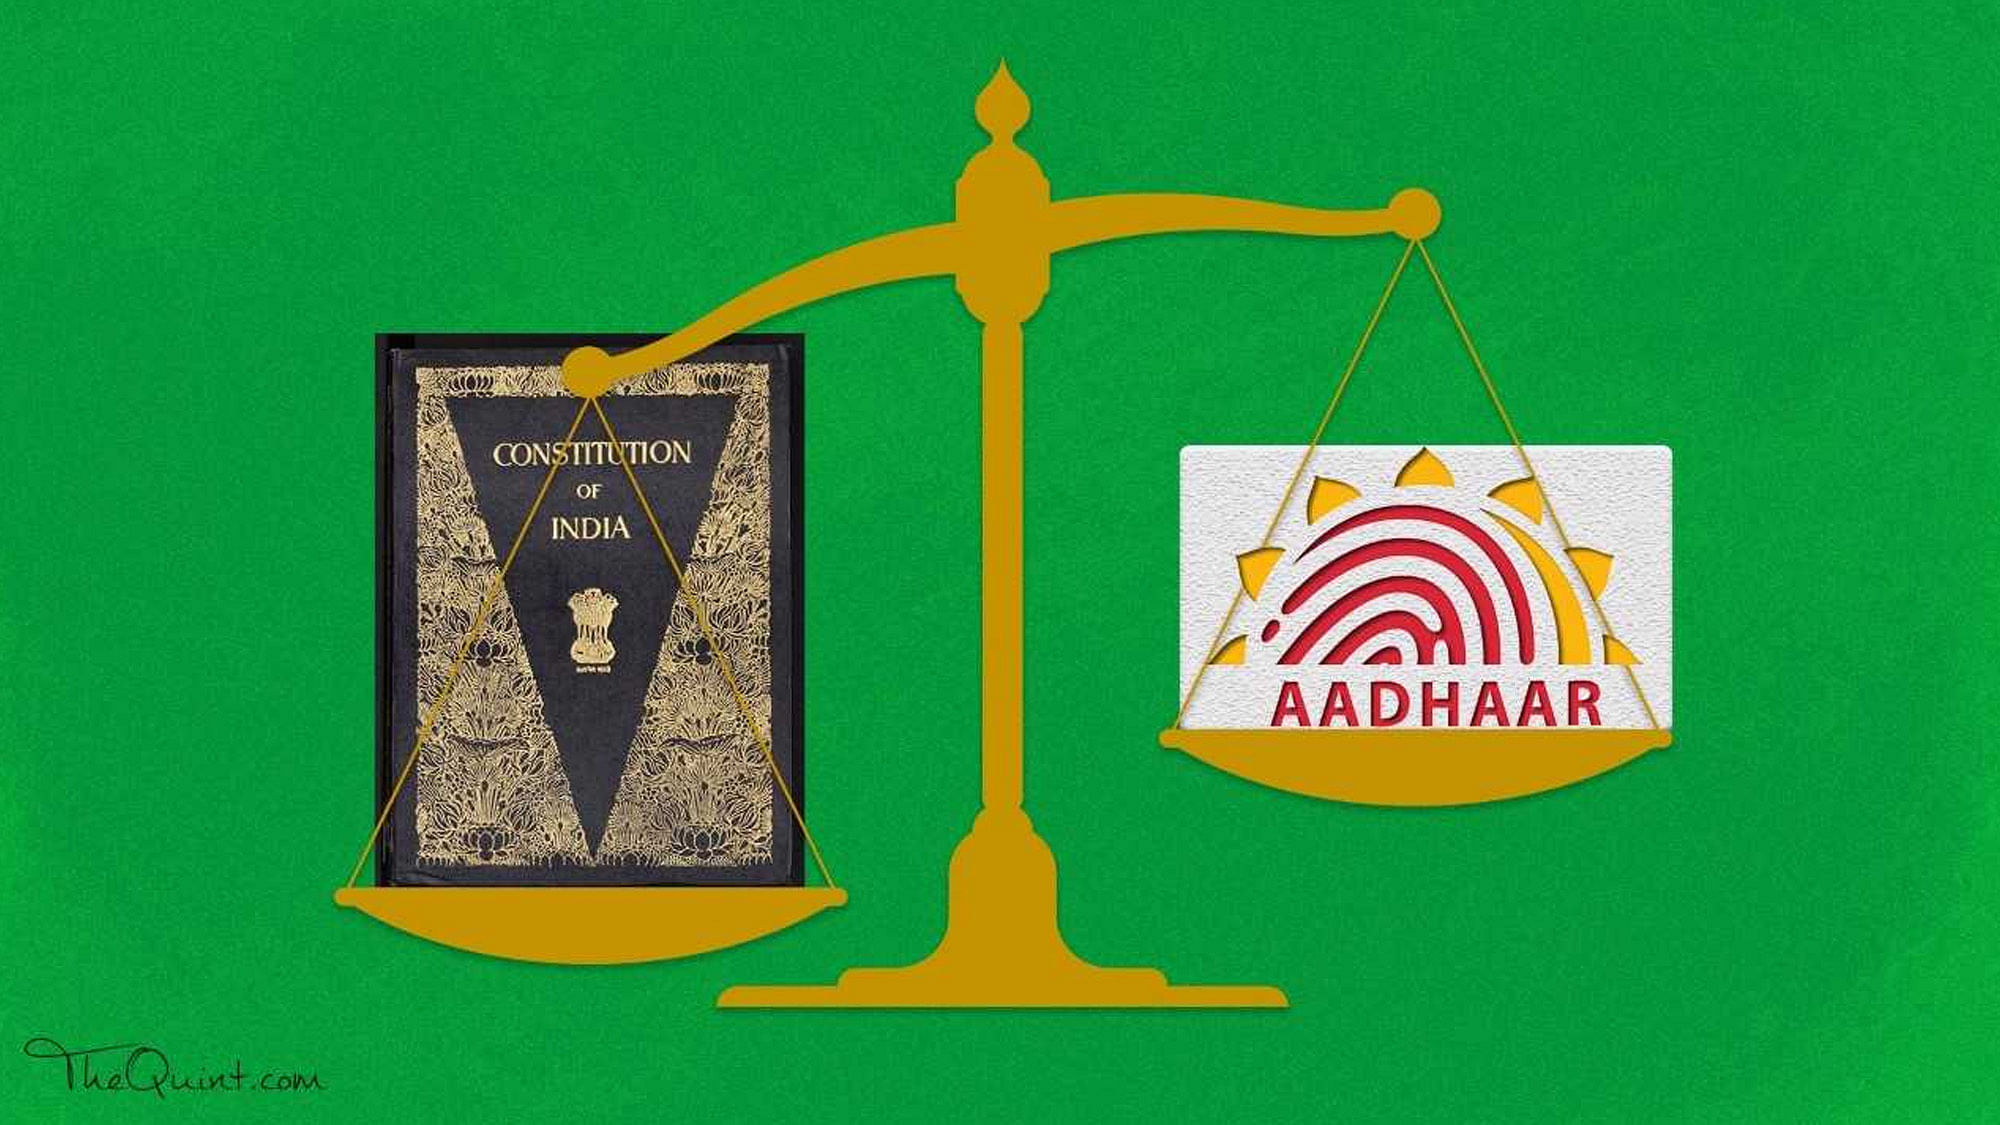 The Supreme Court continues to hear arguments against the constitutionality of Aadhaar